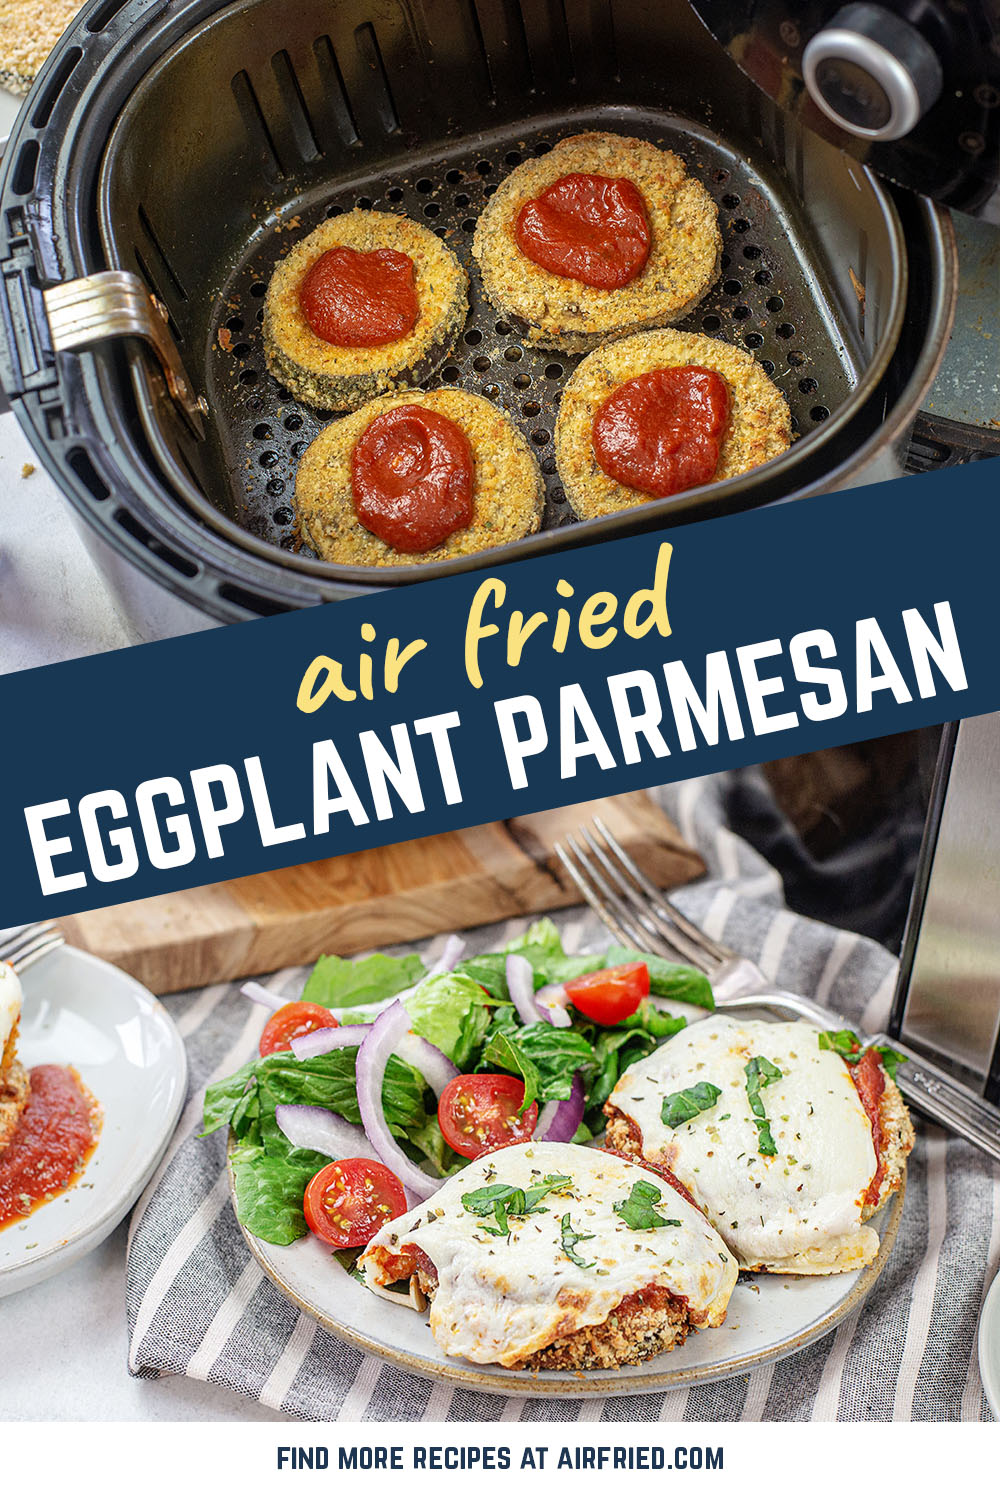 Air fryer eggplant Parmesan cooks just 15 minutes.  The result is pleasant looking, savory dinner!